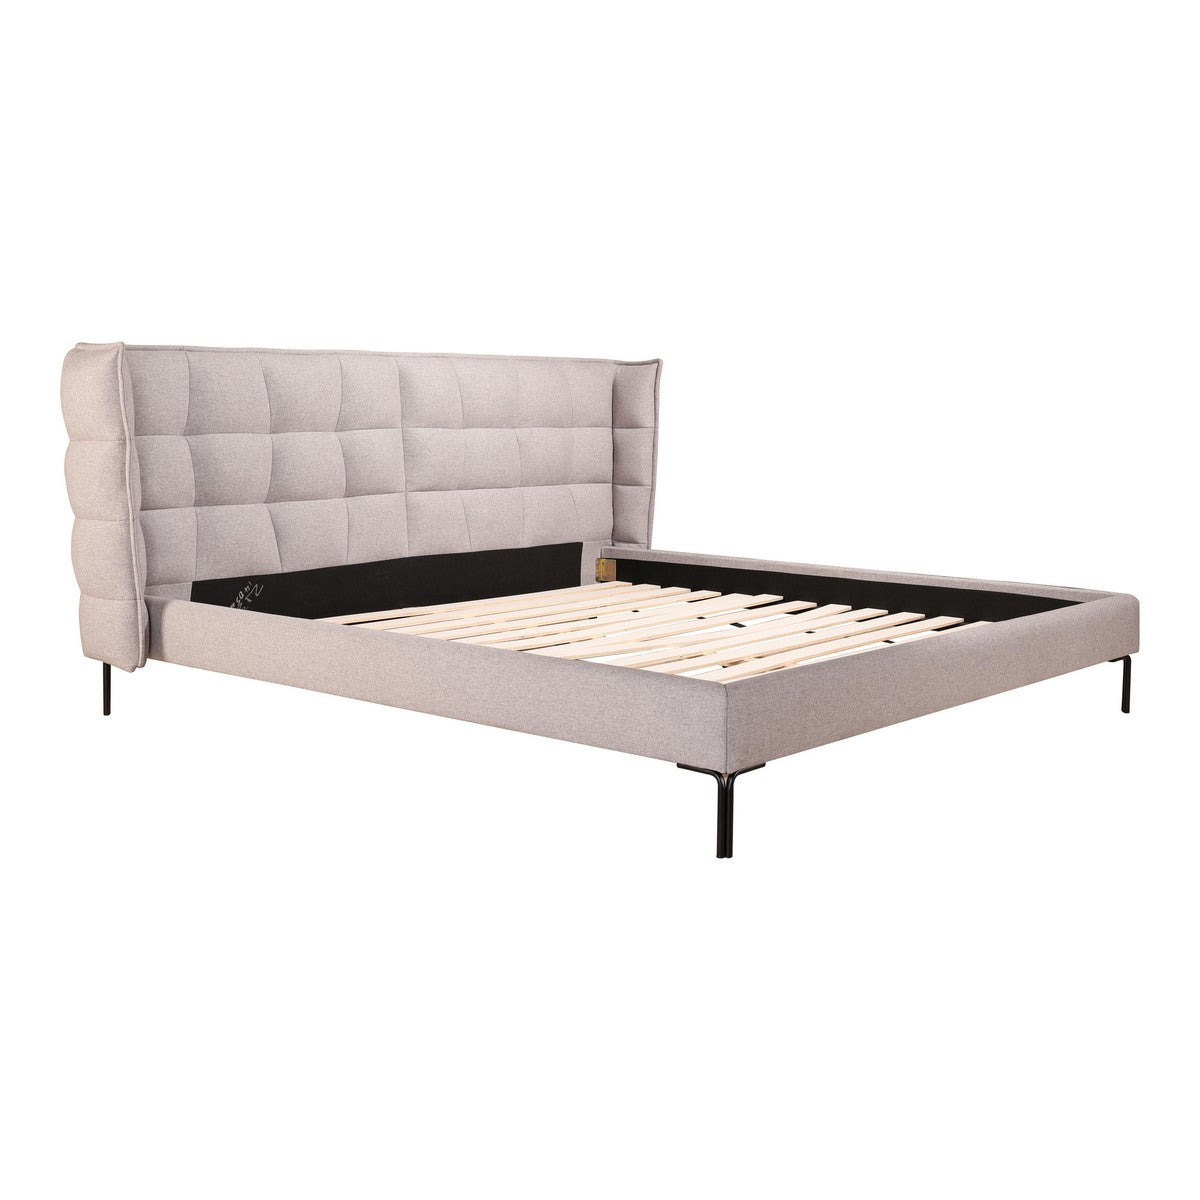 Moe's Home Collection Ostalo Queen Bed Grey - RN-1092-29